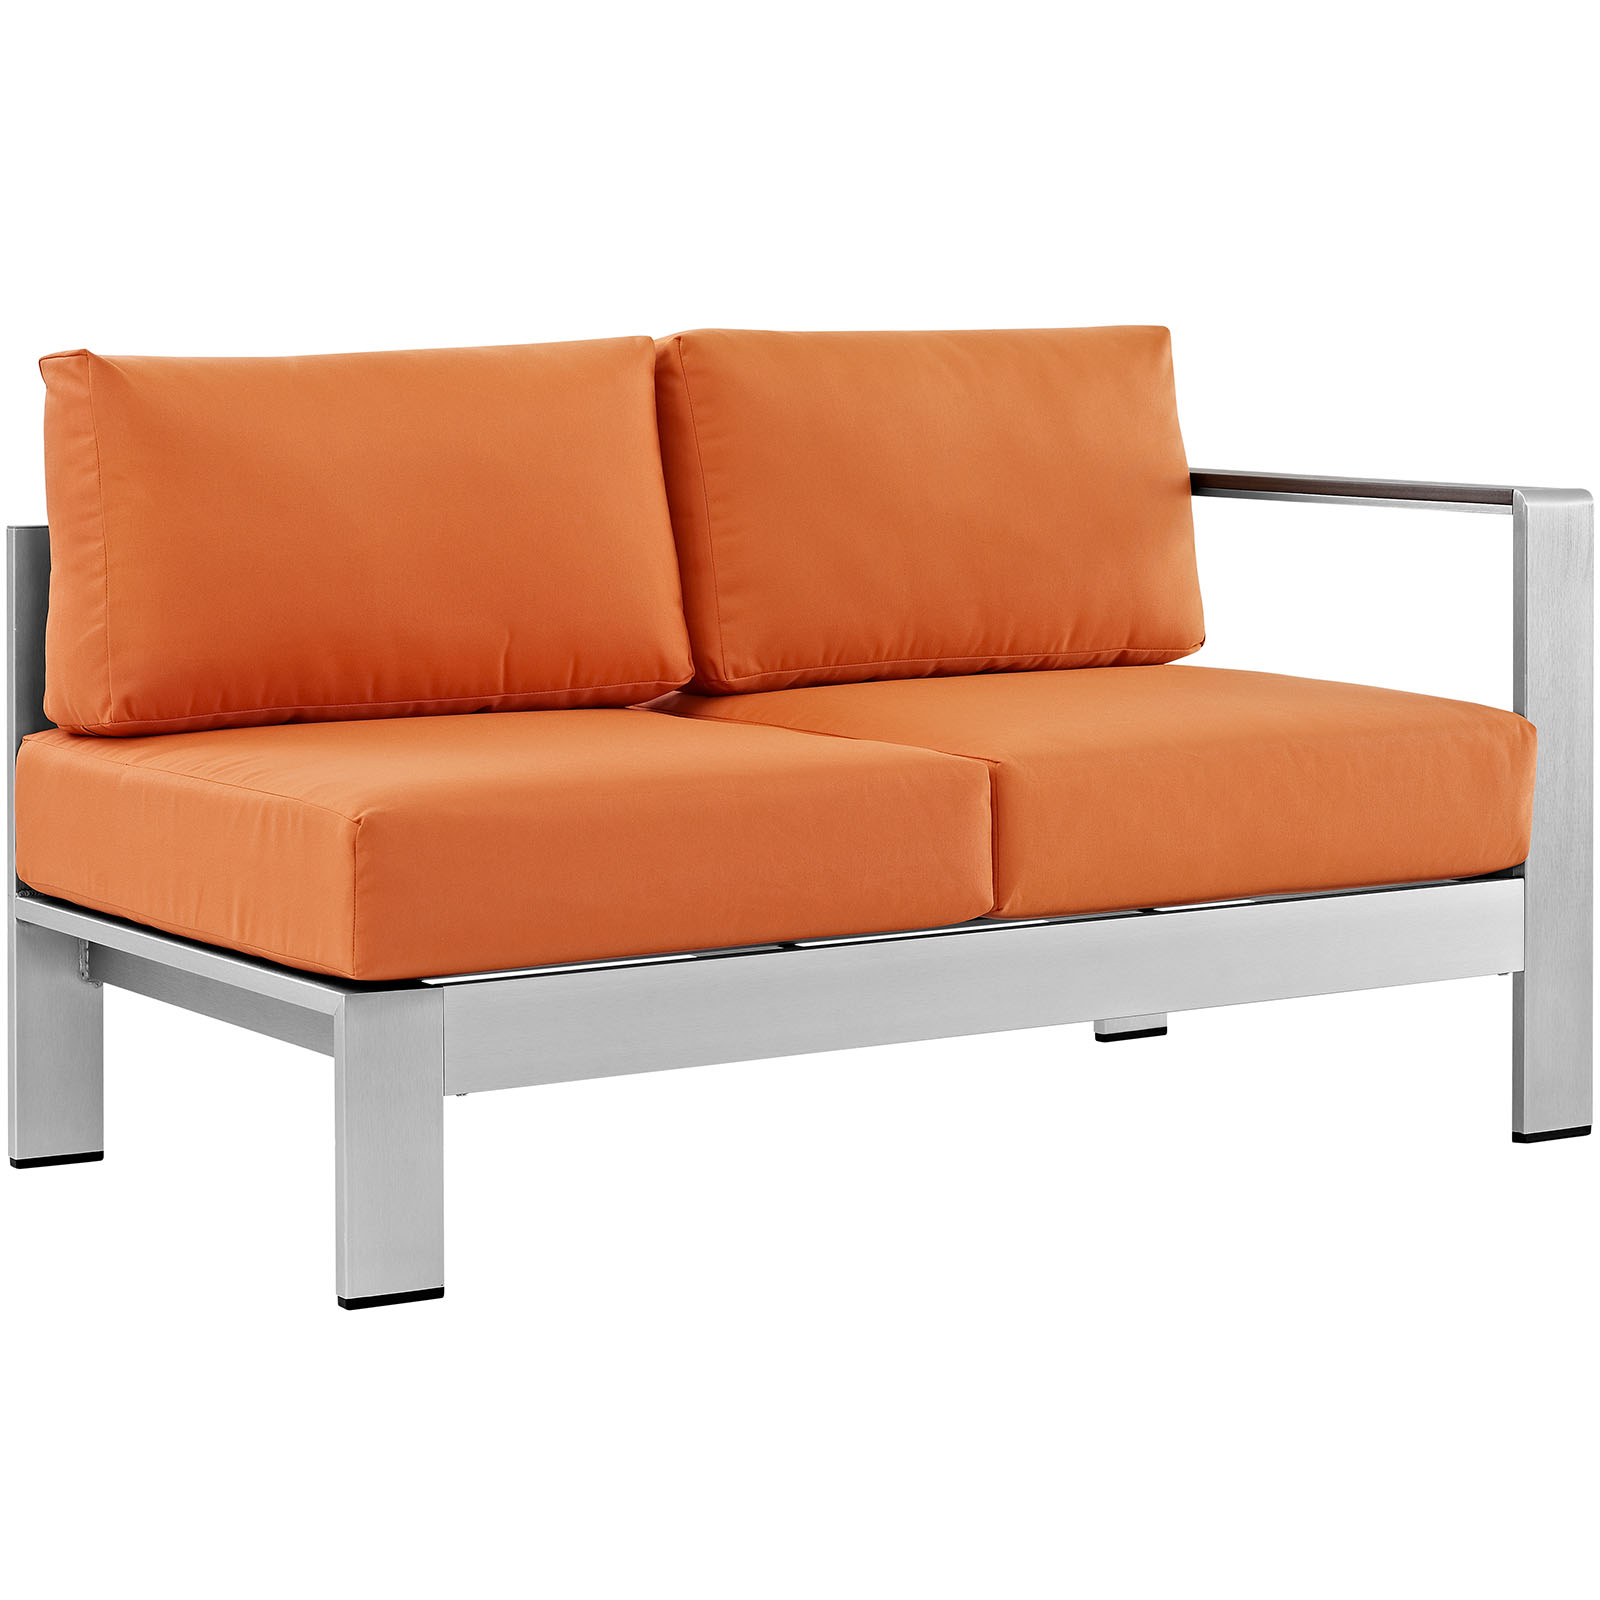 Modway Shore 7 Piece Outdoor Patio Aluminum Sectional Sofa Set in Silver Orange - image 4 of 8